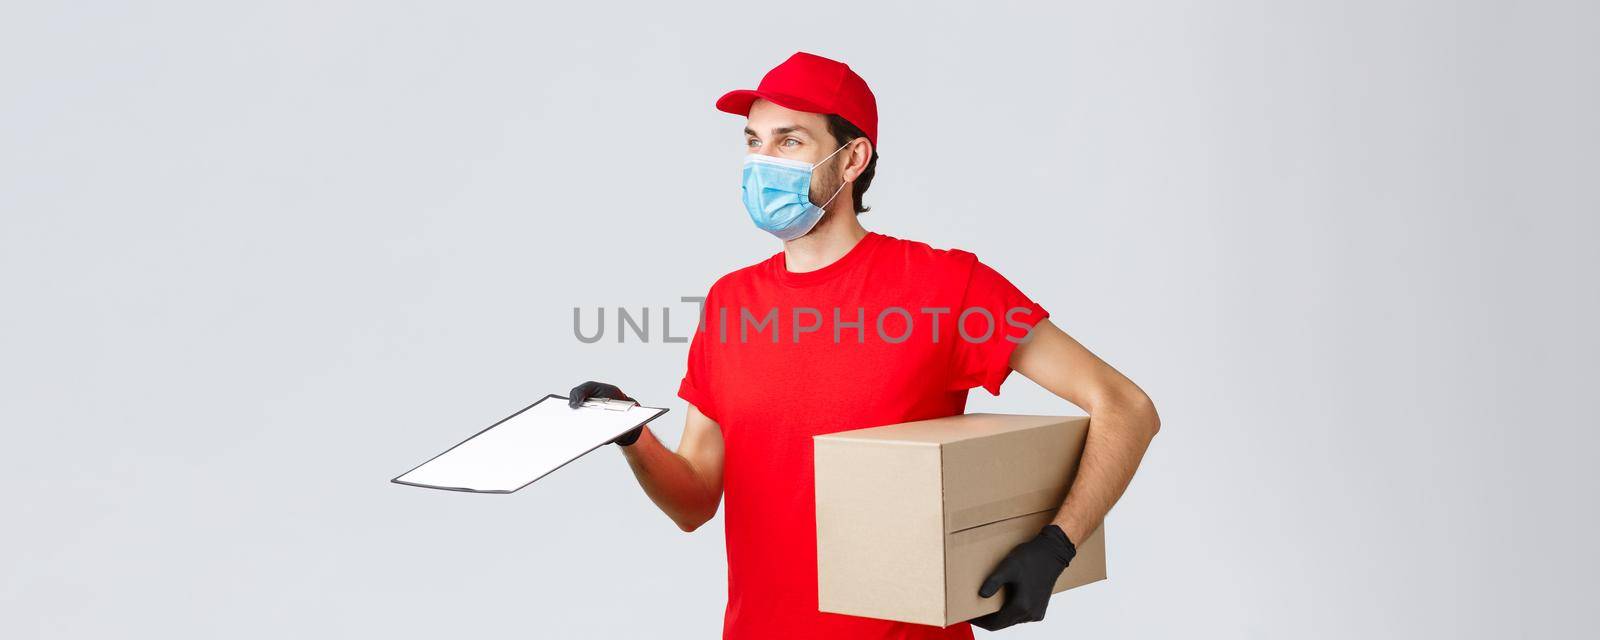 Packages and parcels delivery, covid-19 delivery, transfer orders. Profile of friendly courier in red uniform in face mask and gloves, bring order, hold box and give form for client to sign.